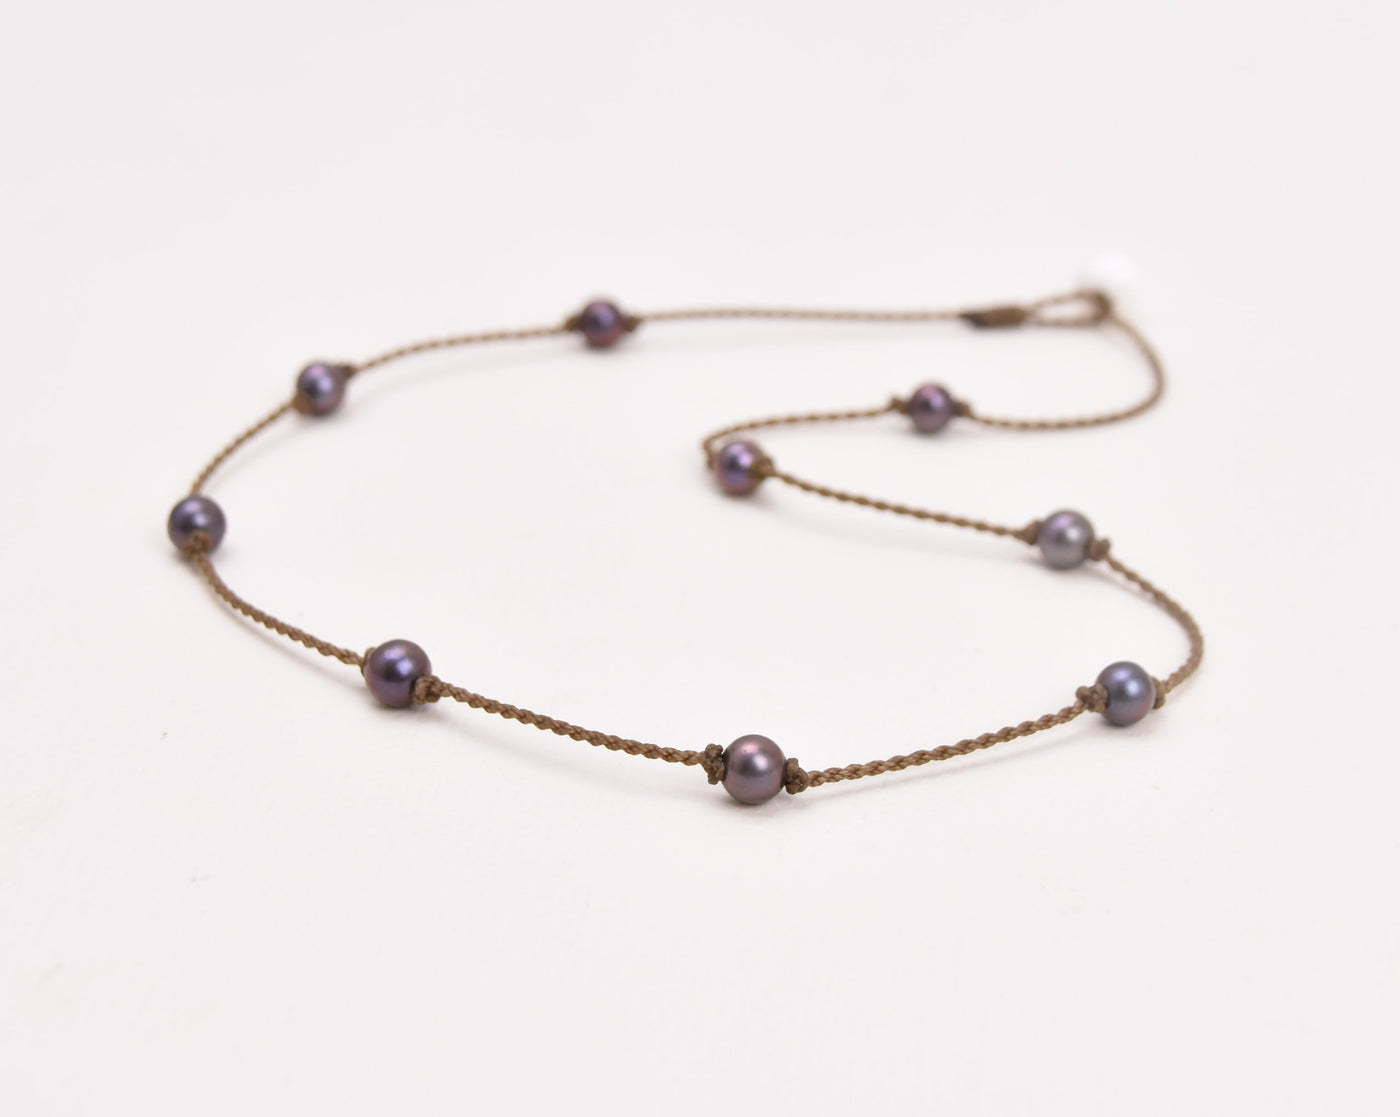 Oval Pearl Princess Necklace